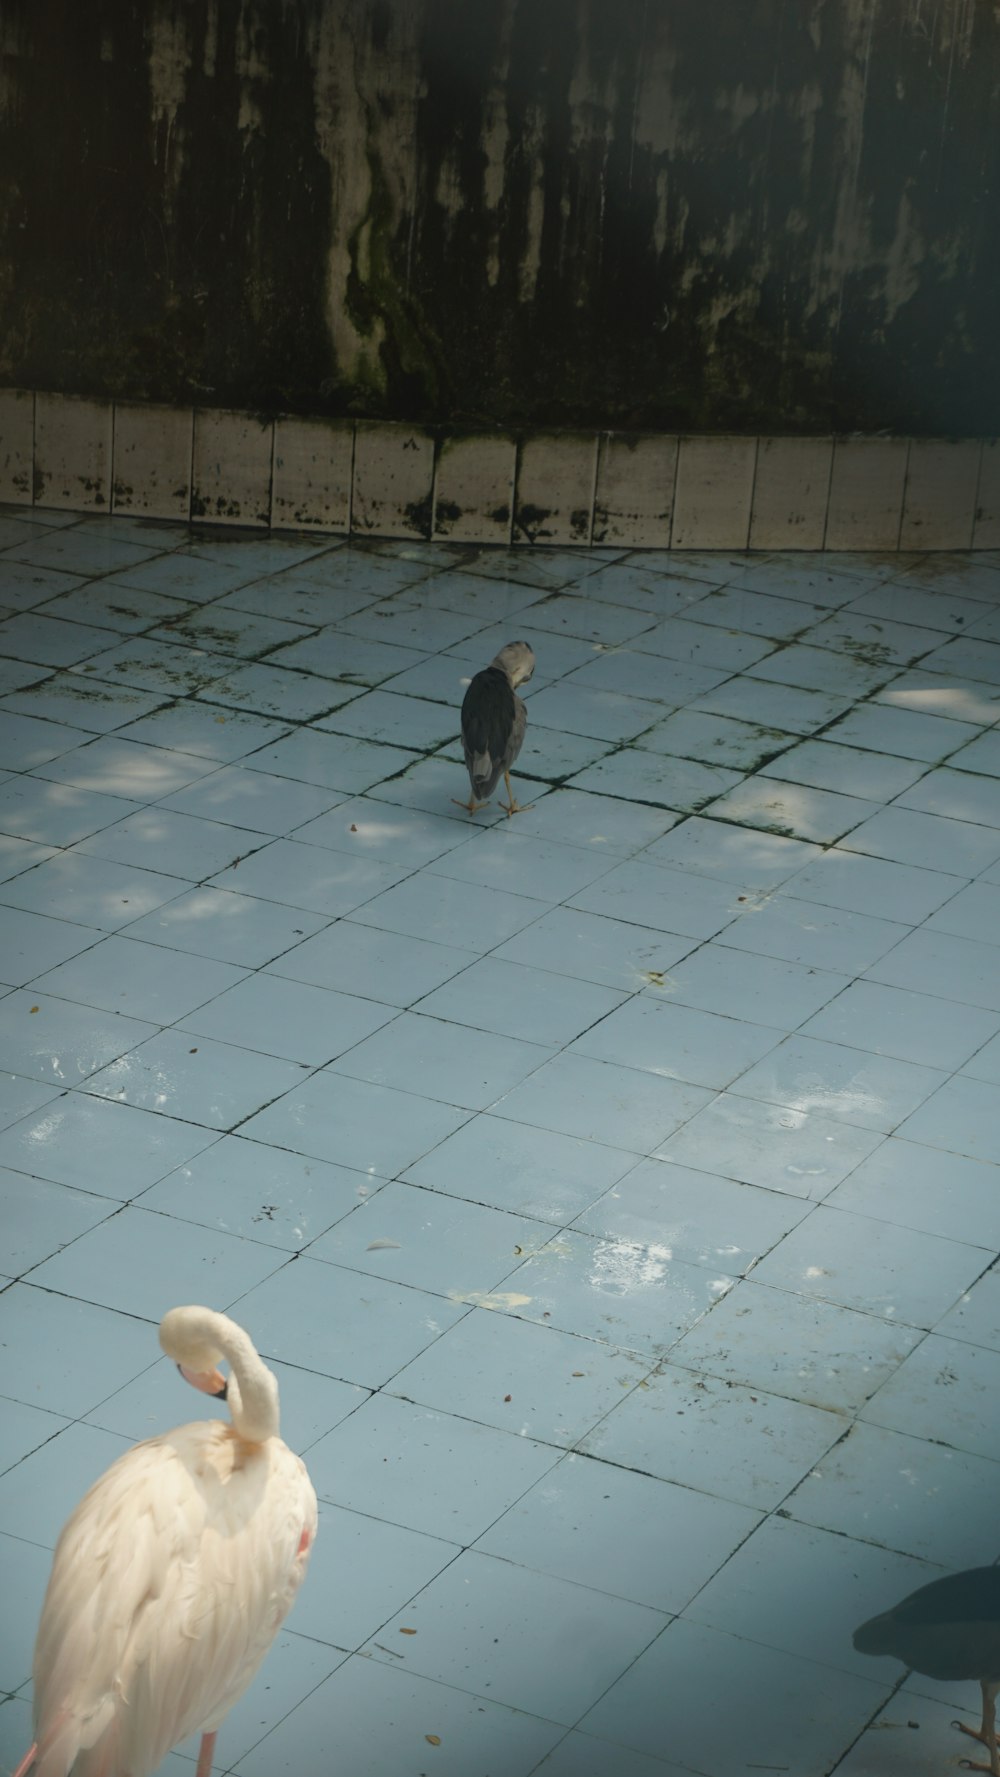 two birds standing on a tiled floor next to each other